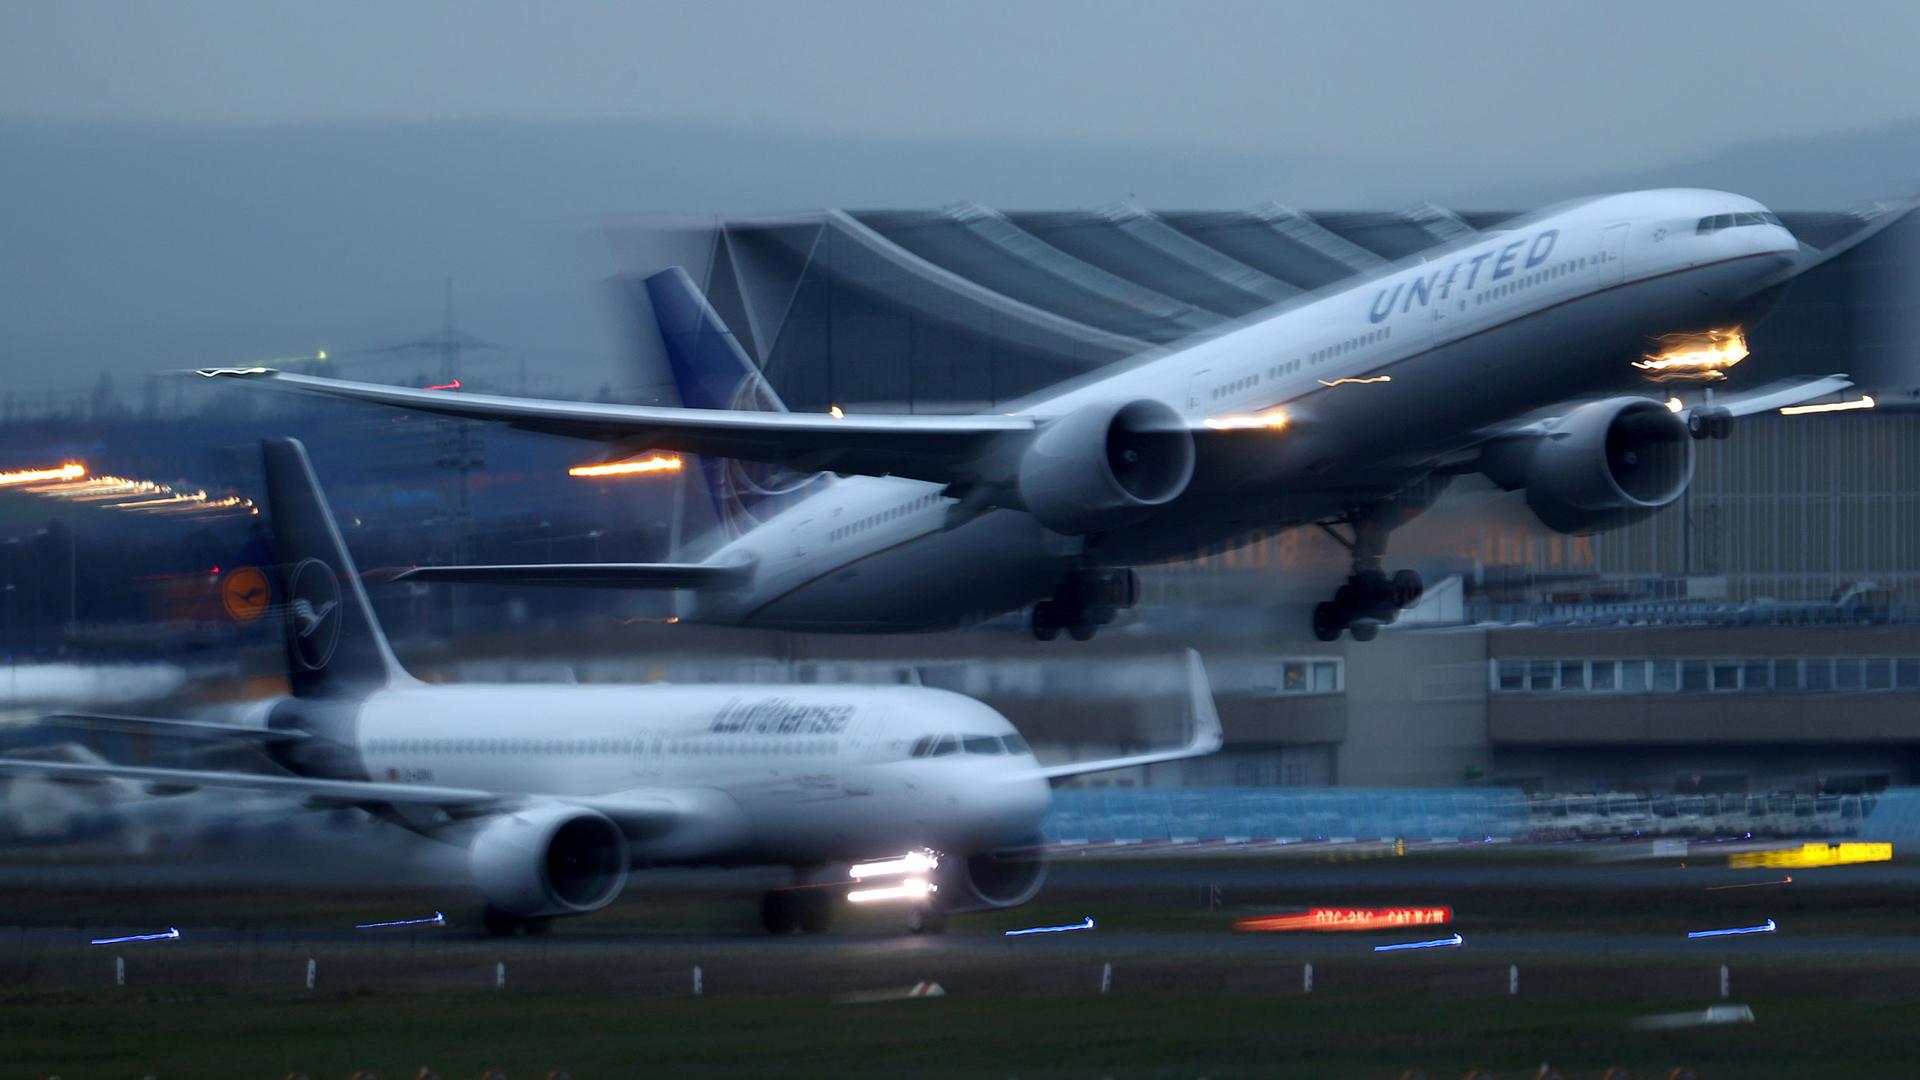 Airplanes of German airline Lufthansa and US carrier United Airlines land and take off at Frankfurt Airport, Germany March 2, 2020.